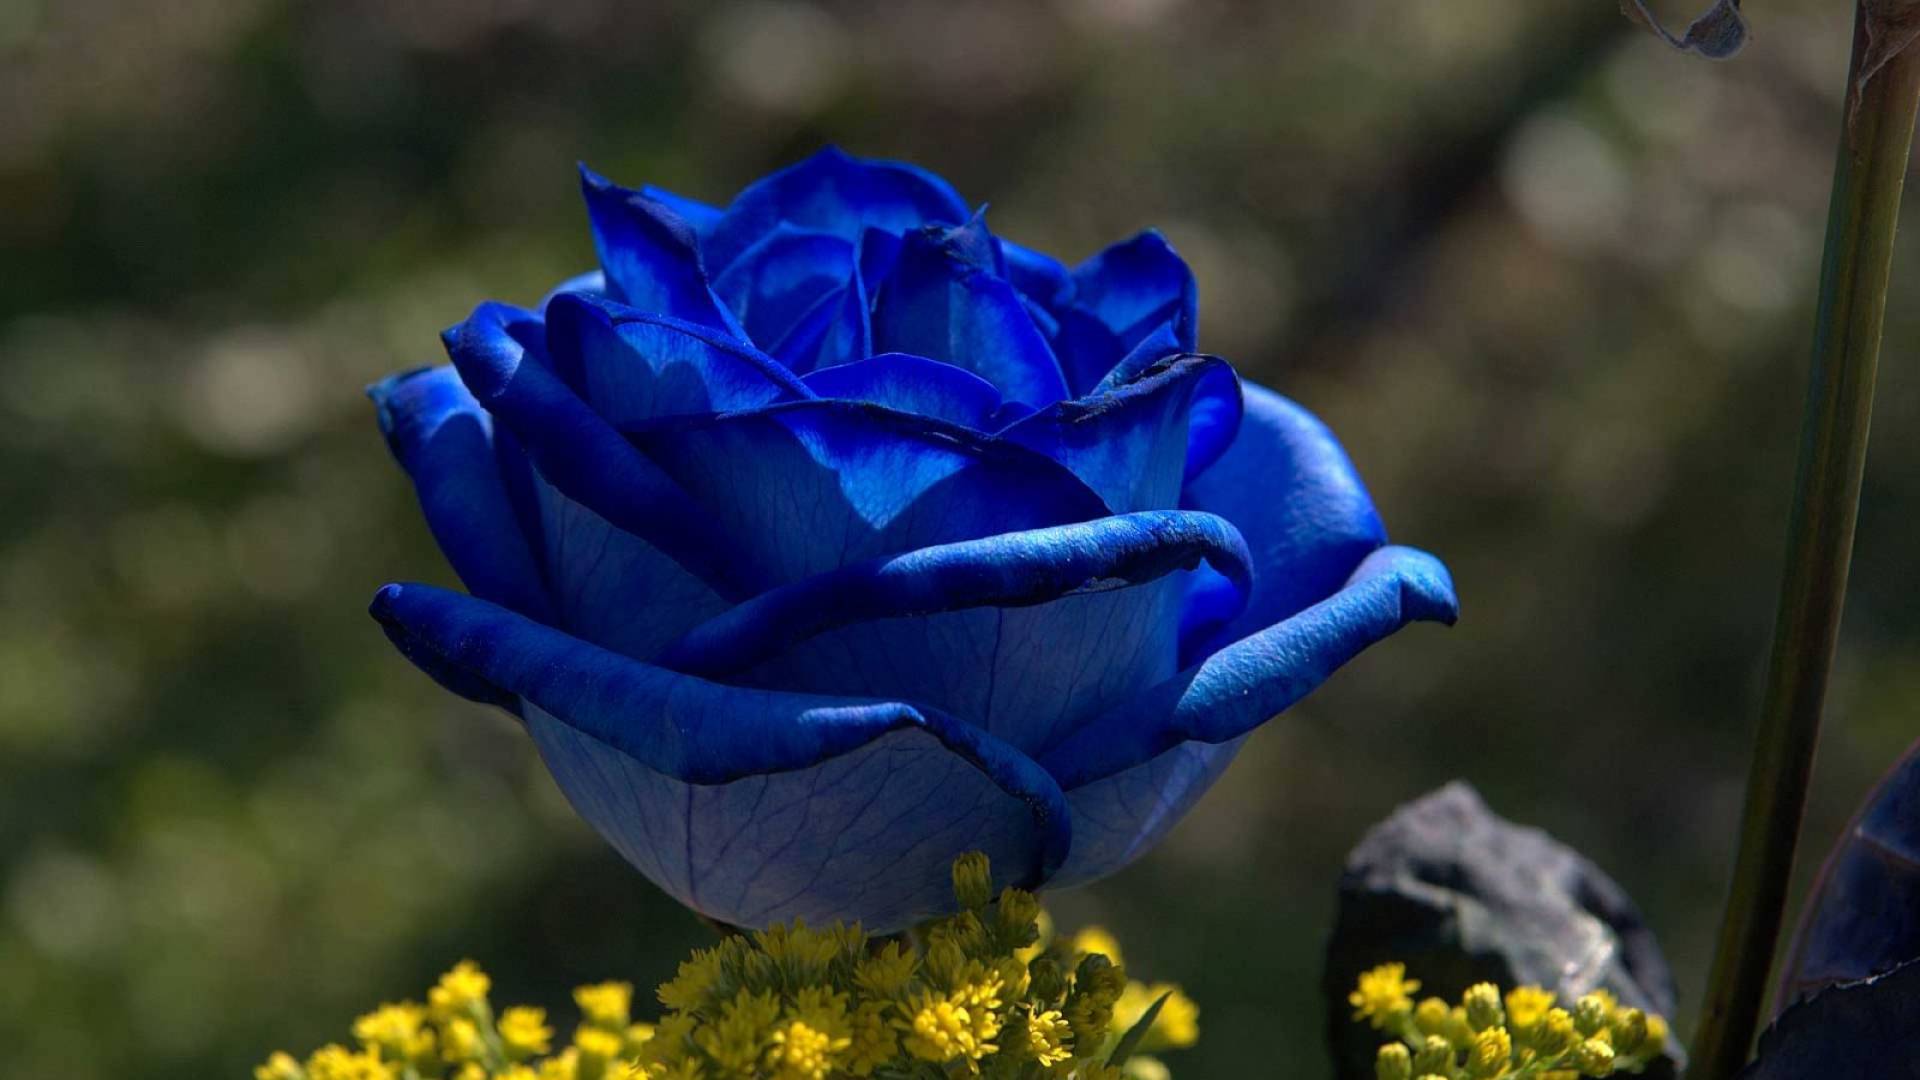 Blue rose at sunrise wallpapers and images - wallpapers ...